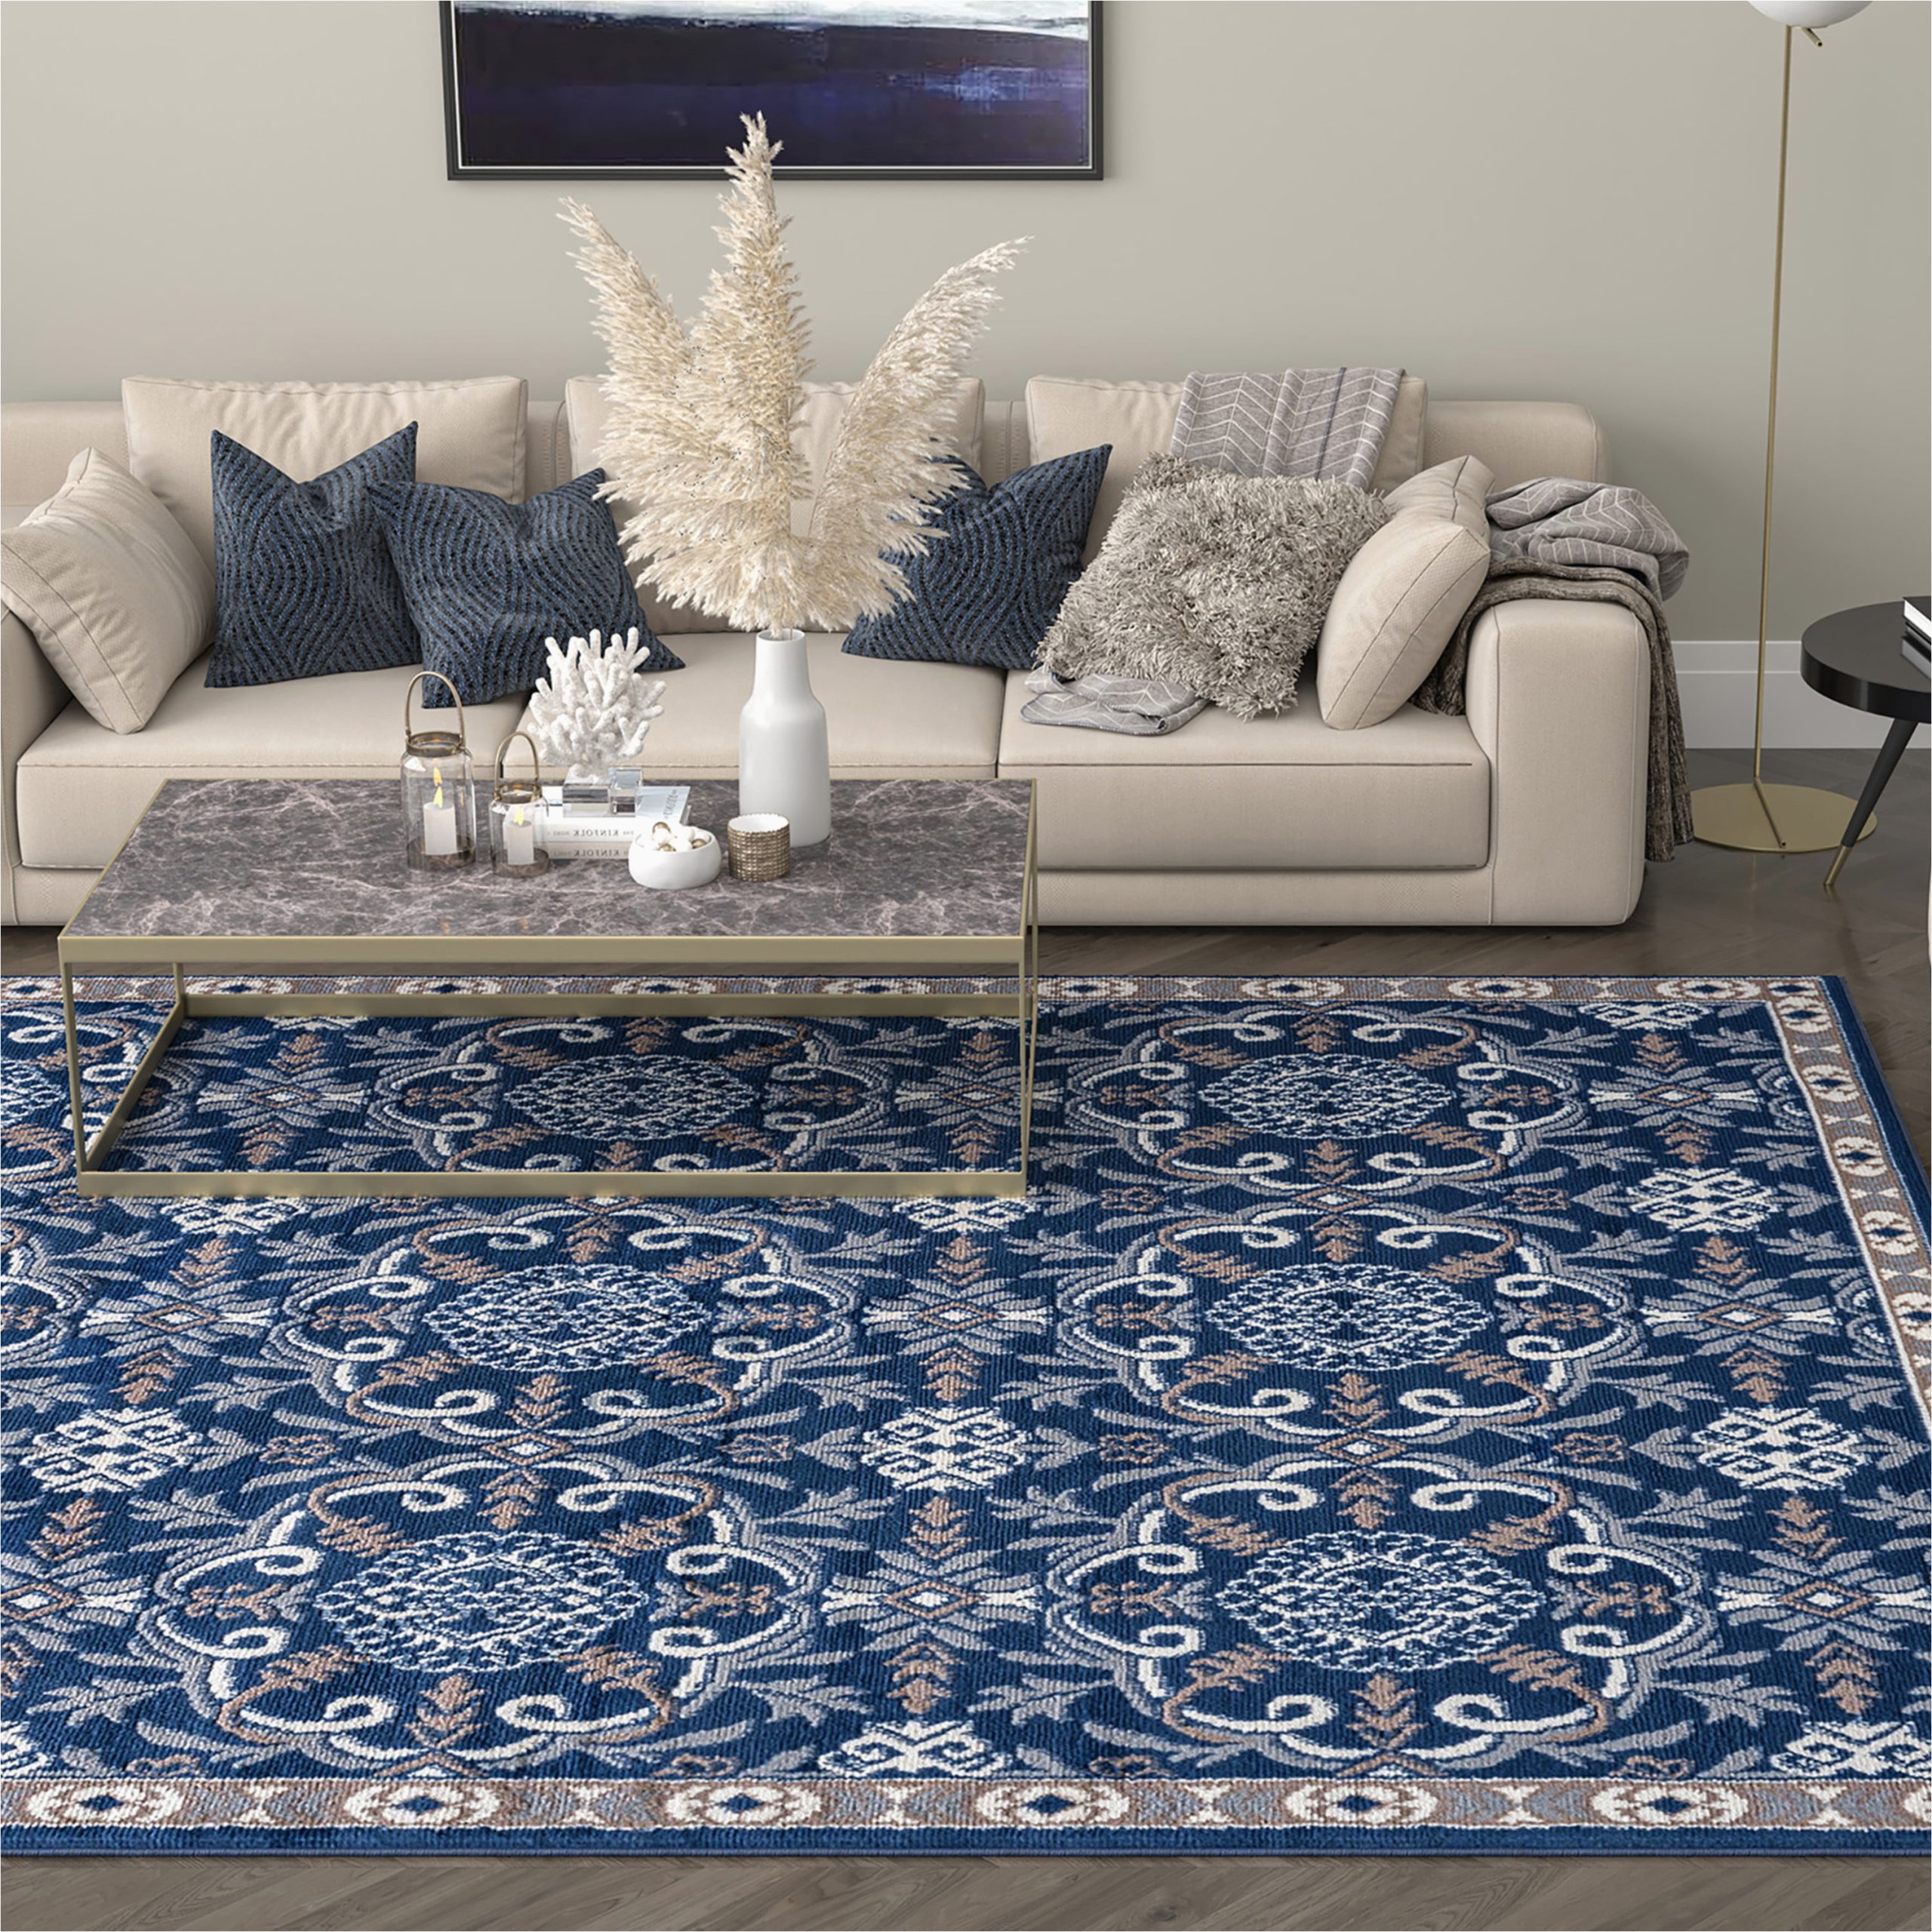 Beige and Navy area Rugs Traditional 5×7 area Rug (5′ X 7′) Brocade Navy, Beige Living Room Easy to Clean